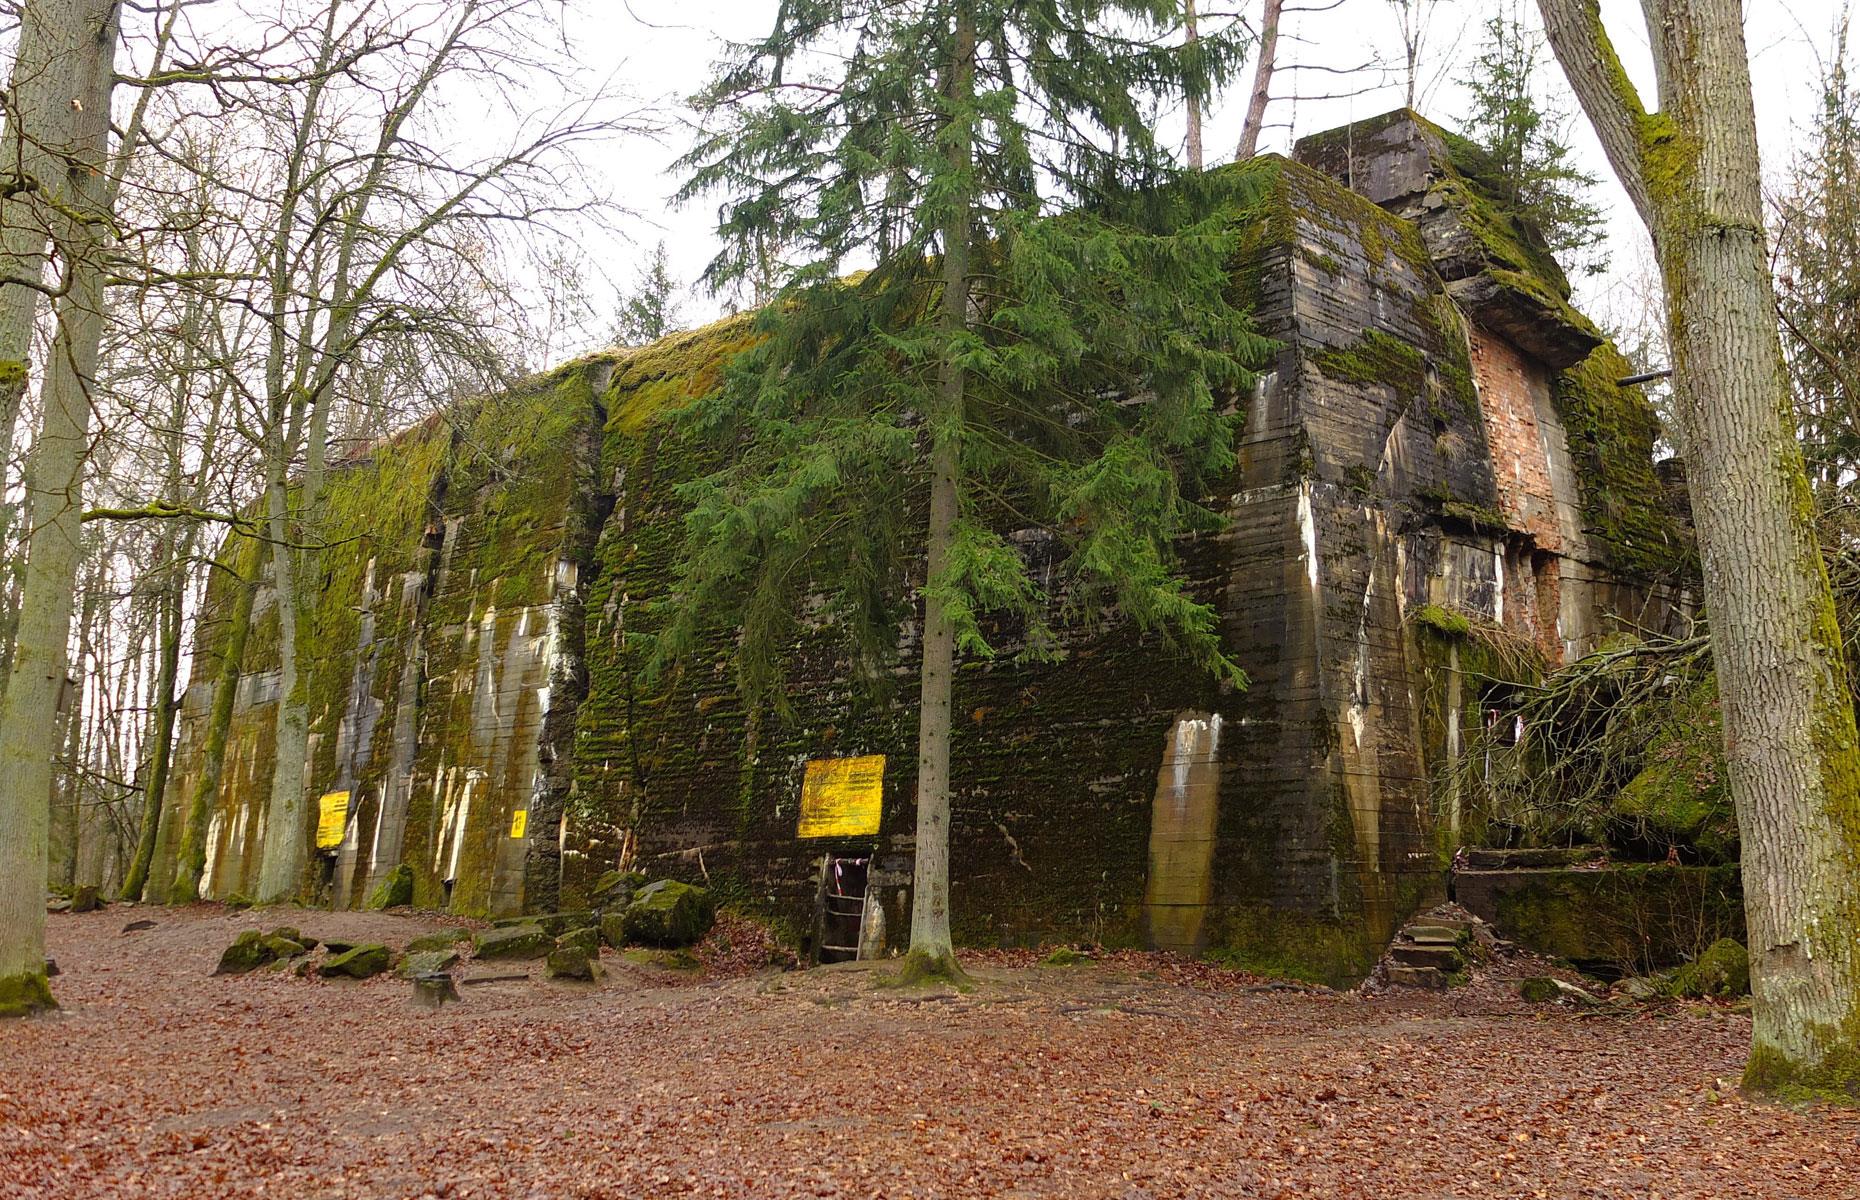 <p>With the Red Army closing in, Hitler bid farewell to the Wolf's Lair in November 1944, and tons of explosives were used to demolish the complex. Yet most of the structures were only partially destroyed, due to their robustness. Now attracting hundreds of thousands of visitors a year, their development as a tourist attraction has been <a href="https://www.bbc.com/news/world-europe-49111787">highly controversial</a>.</p>